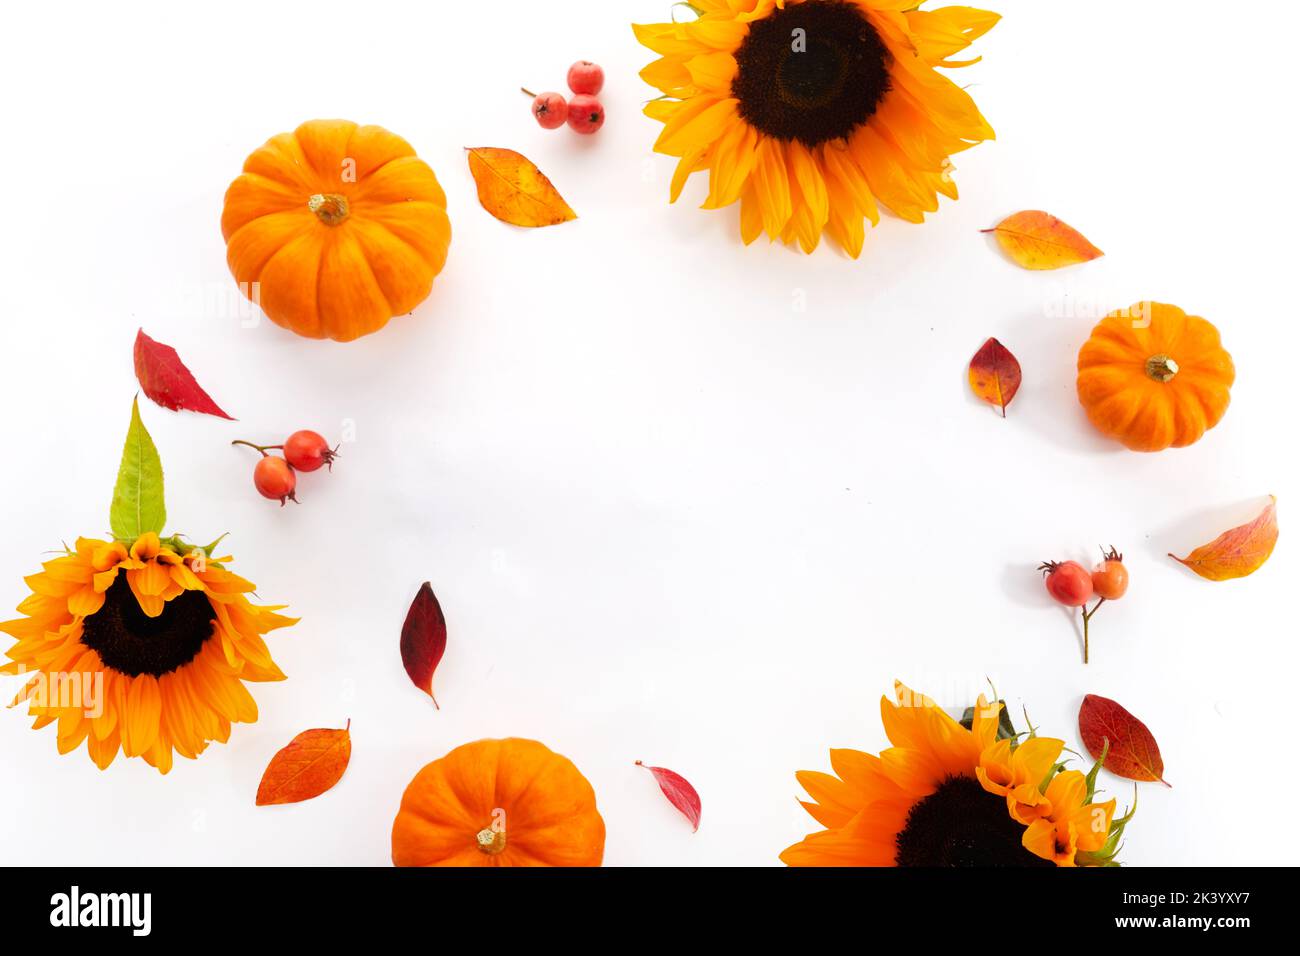 Autumn composition. Pumpkin and sunflowers on white background. Autumn, fall, thanksgiving day concept. Stock Photo